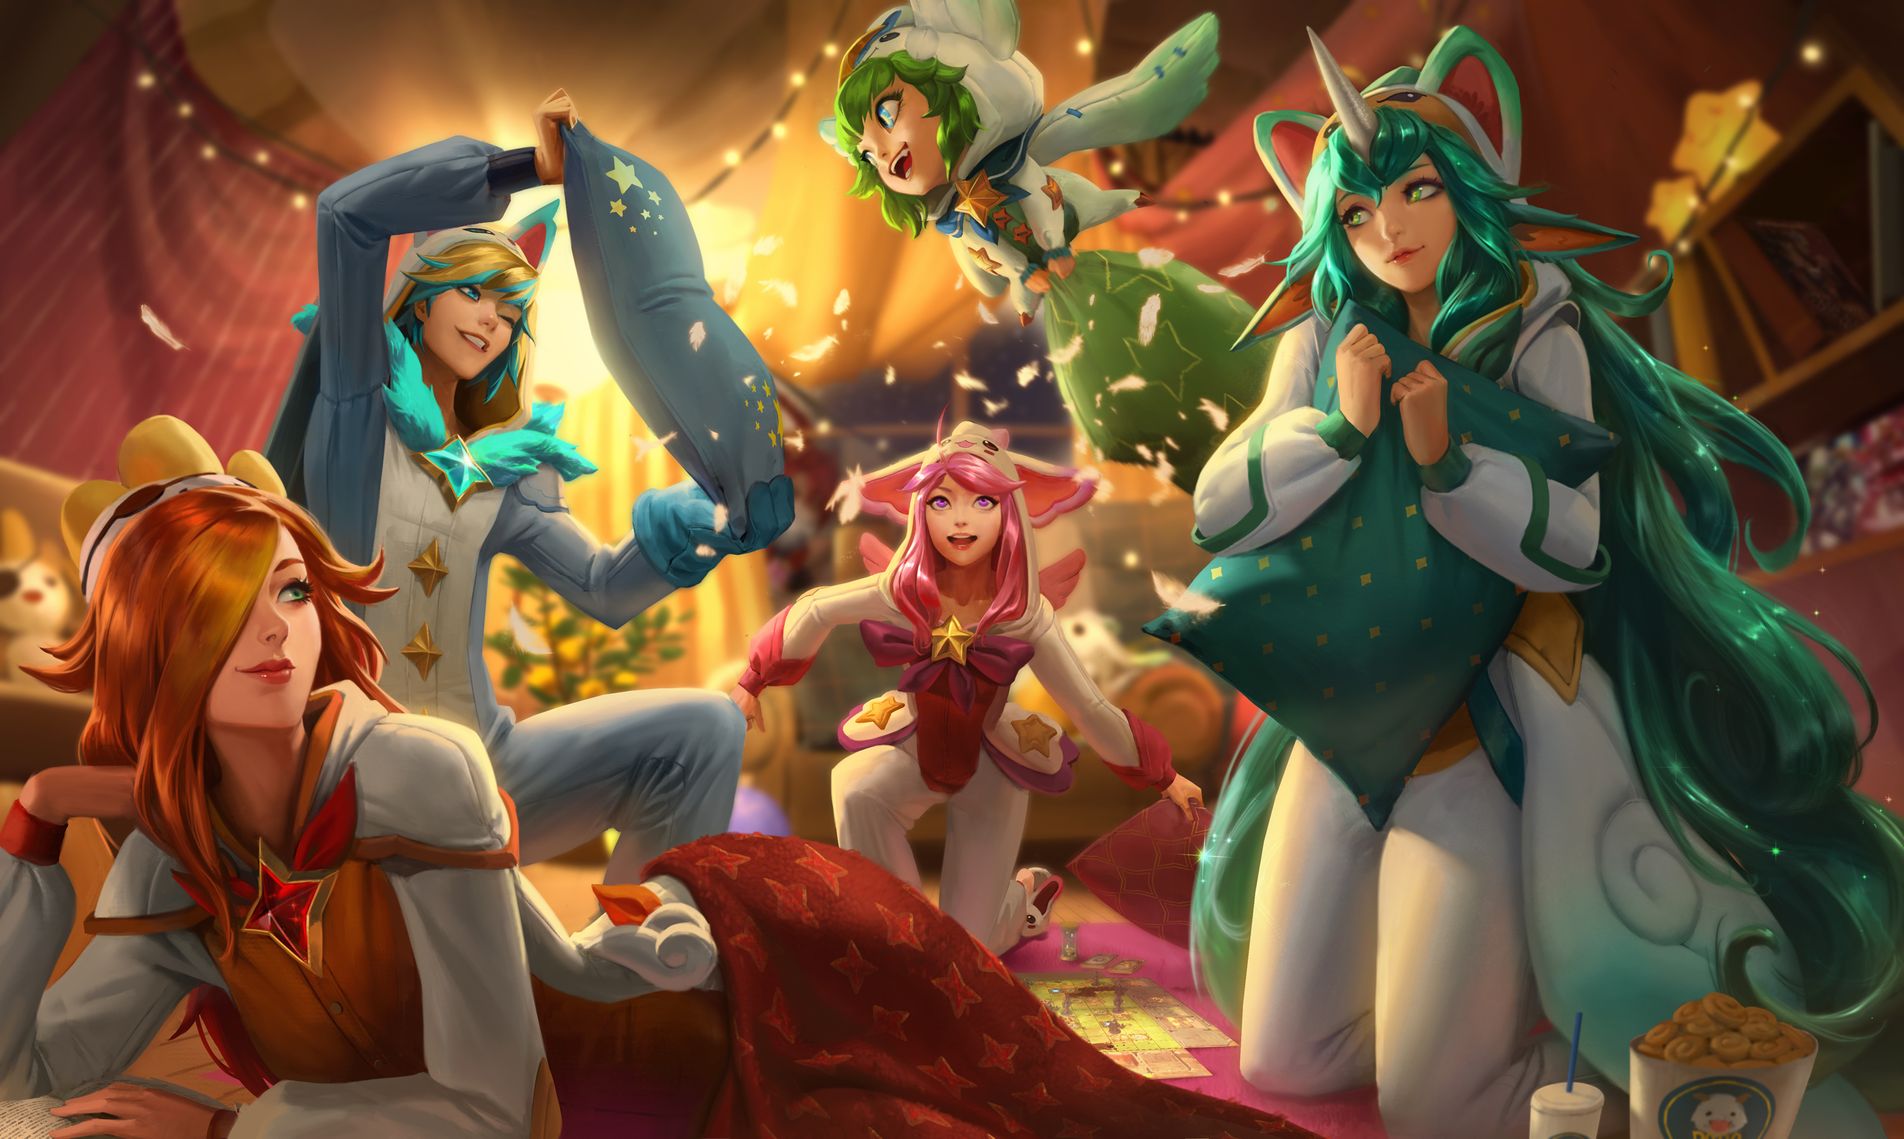 Pajama Guardian Champions in League of Legends Have Silly Skins